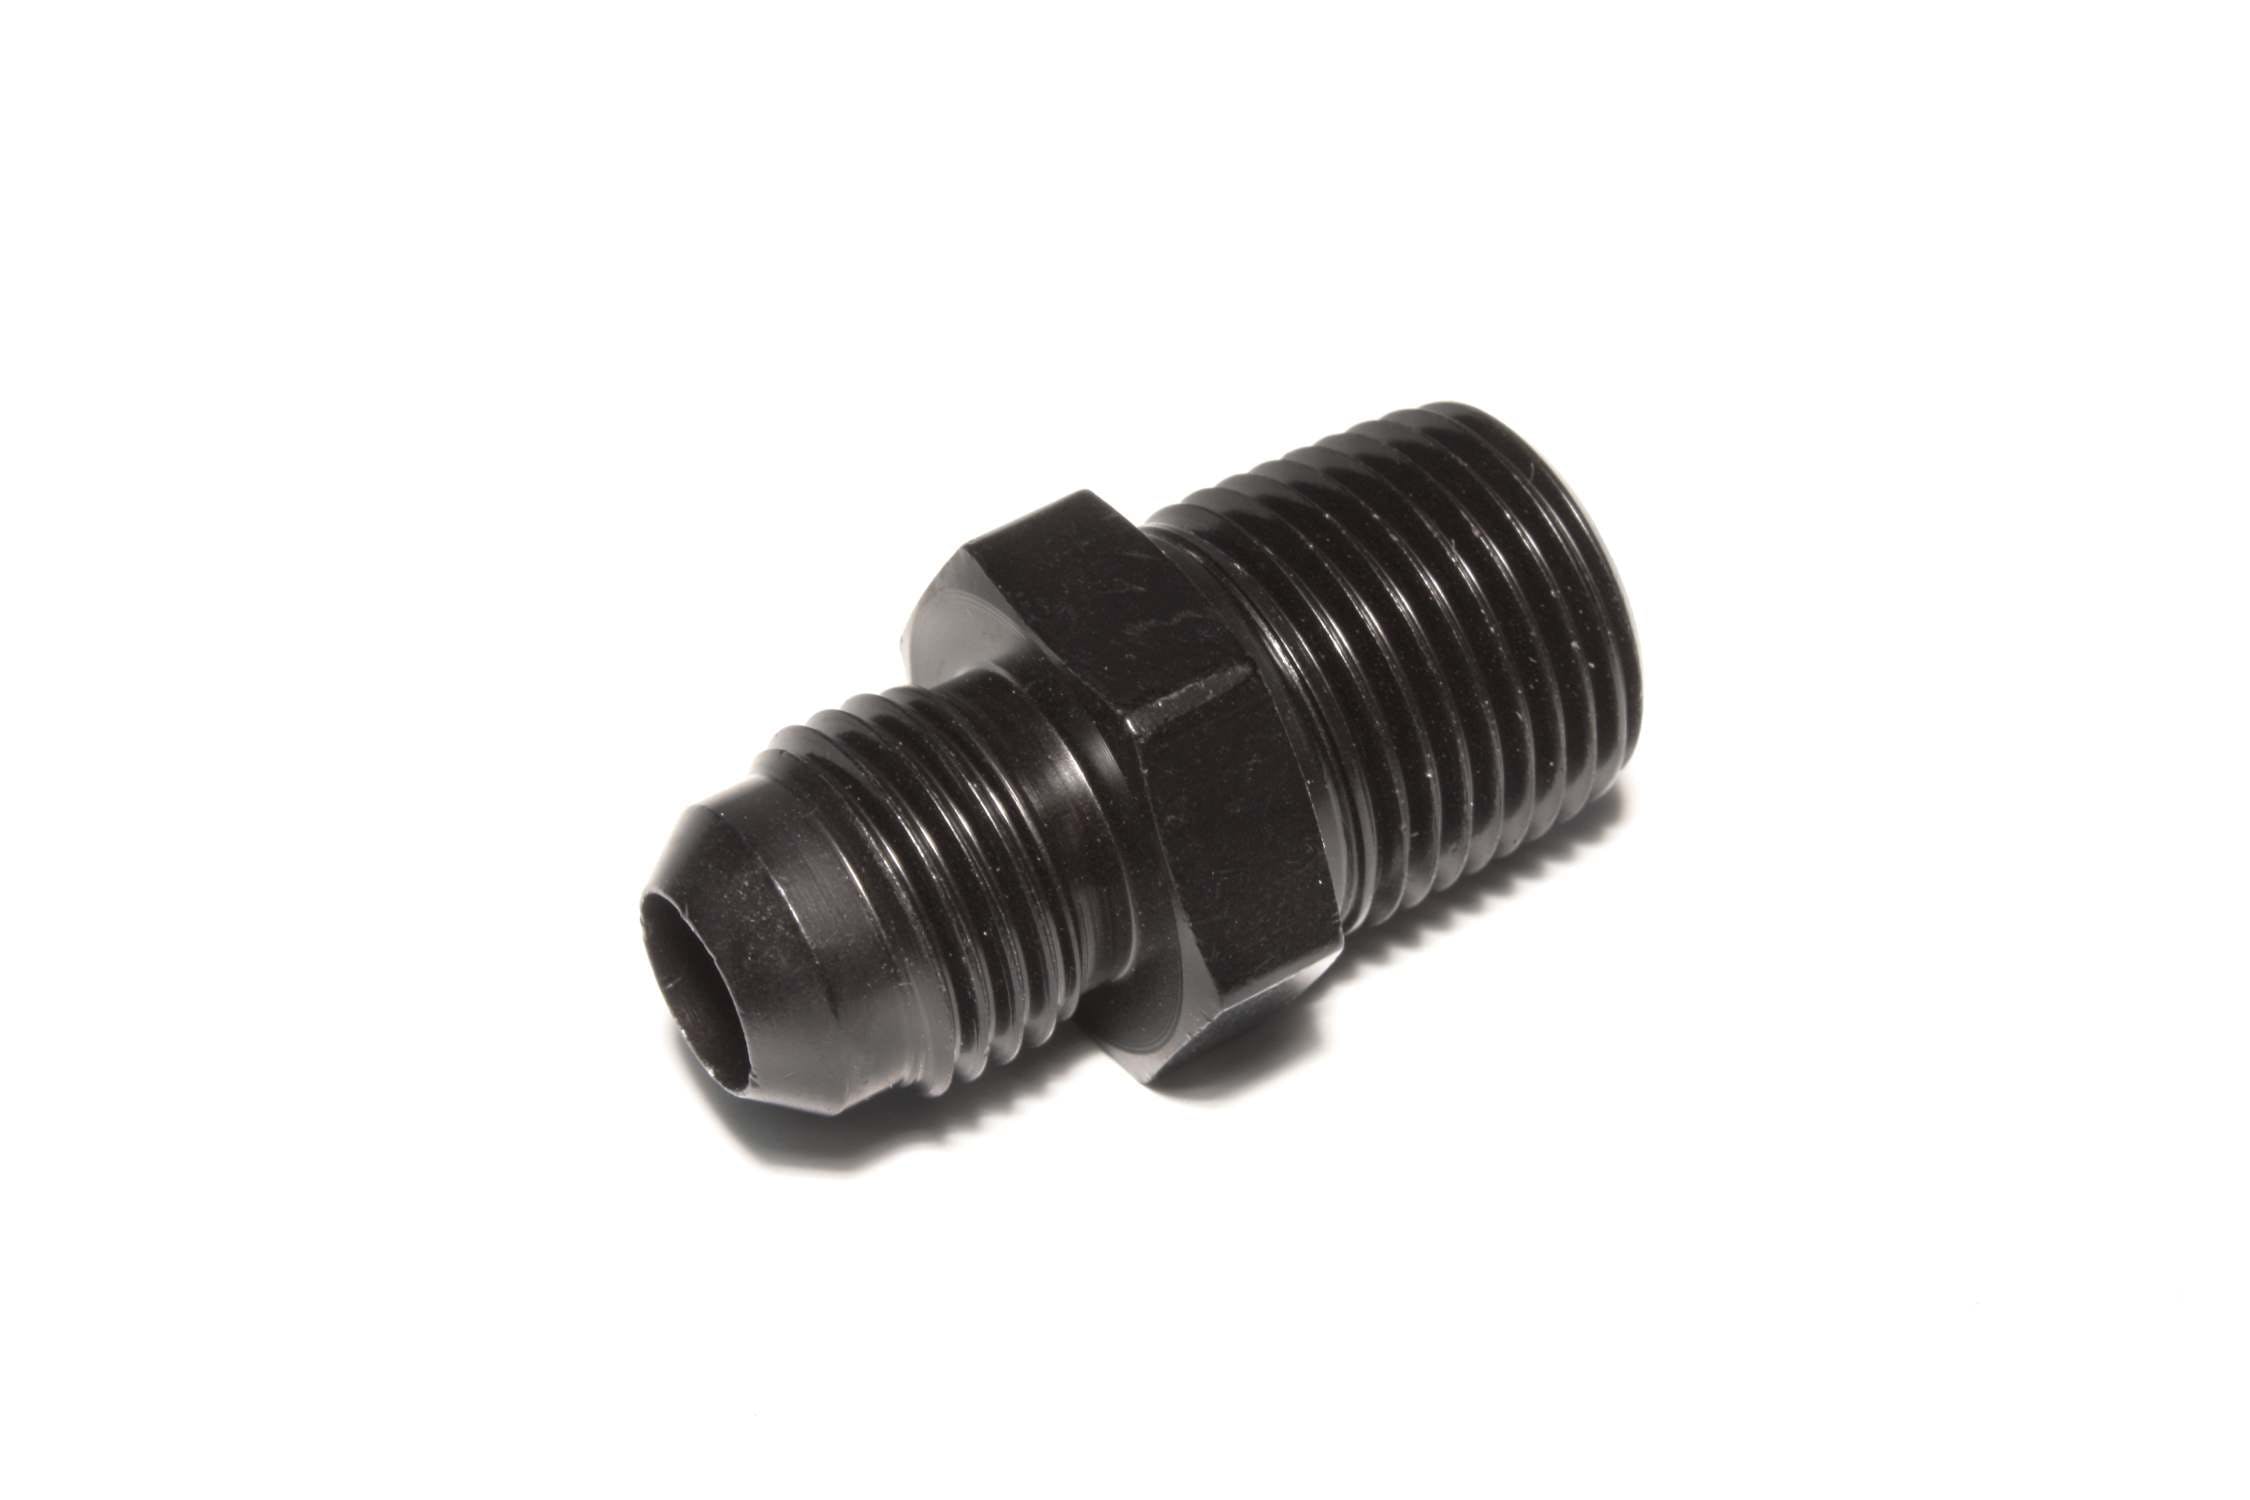 FAST - Fuel Air Spark Technology 54037A-1 This fitting features a 3/8 NPT Male and a 8AN Male